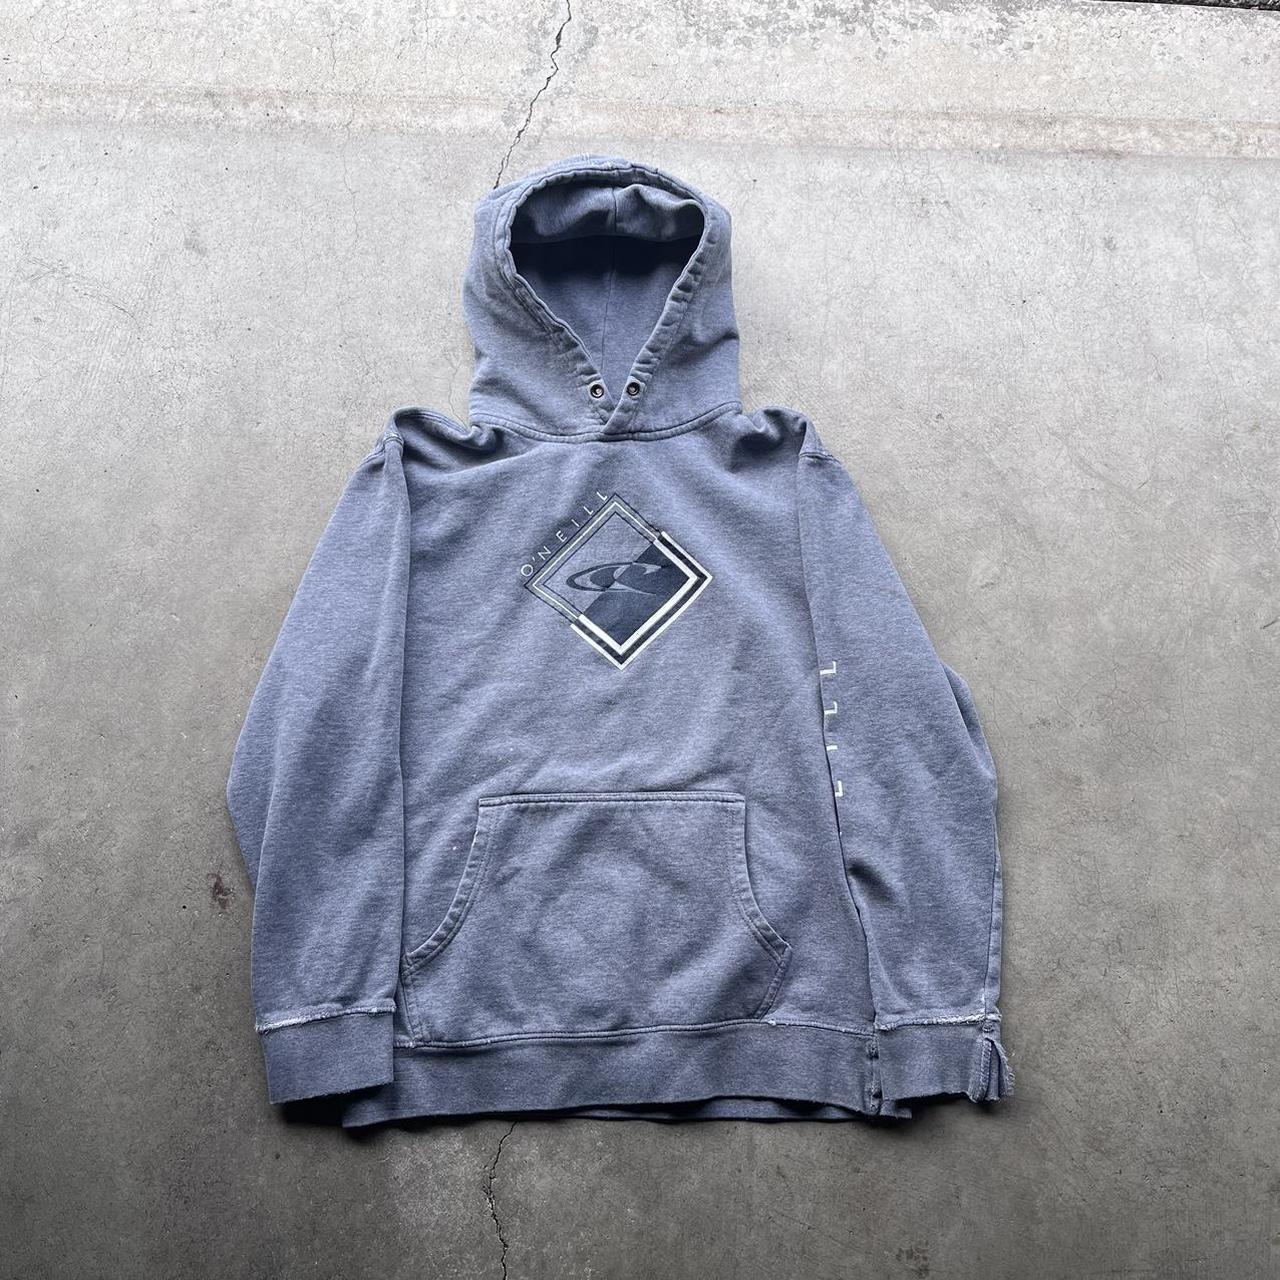 O'Neill Men's Grey and Blue Hoodie